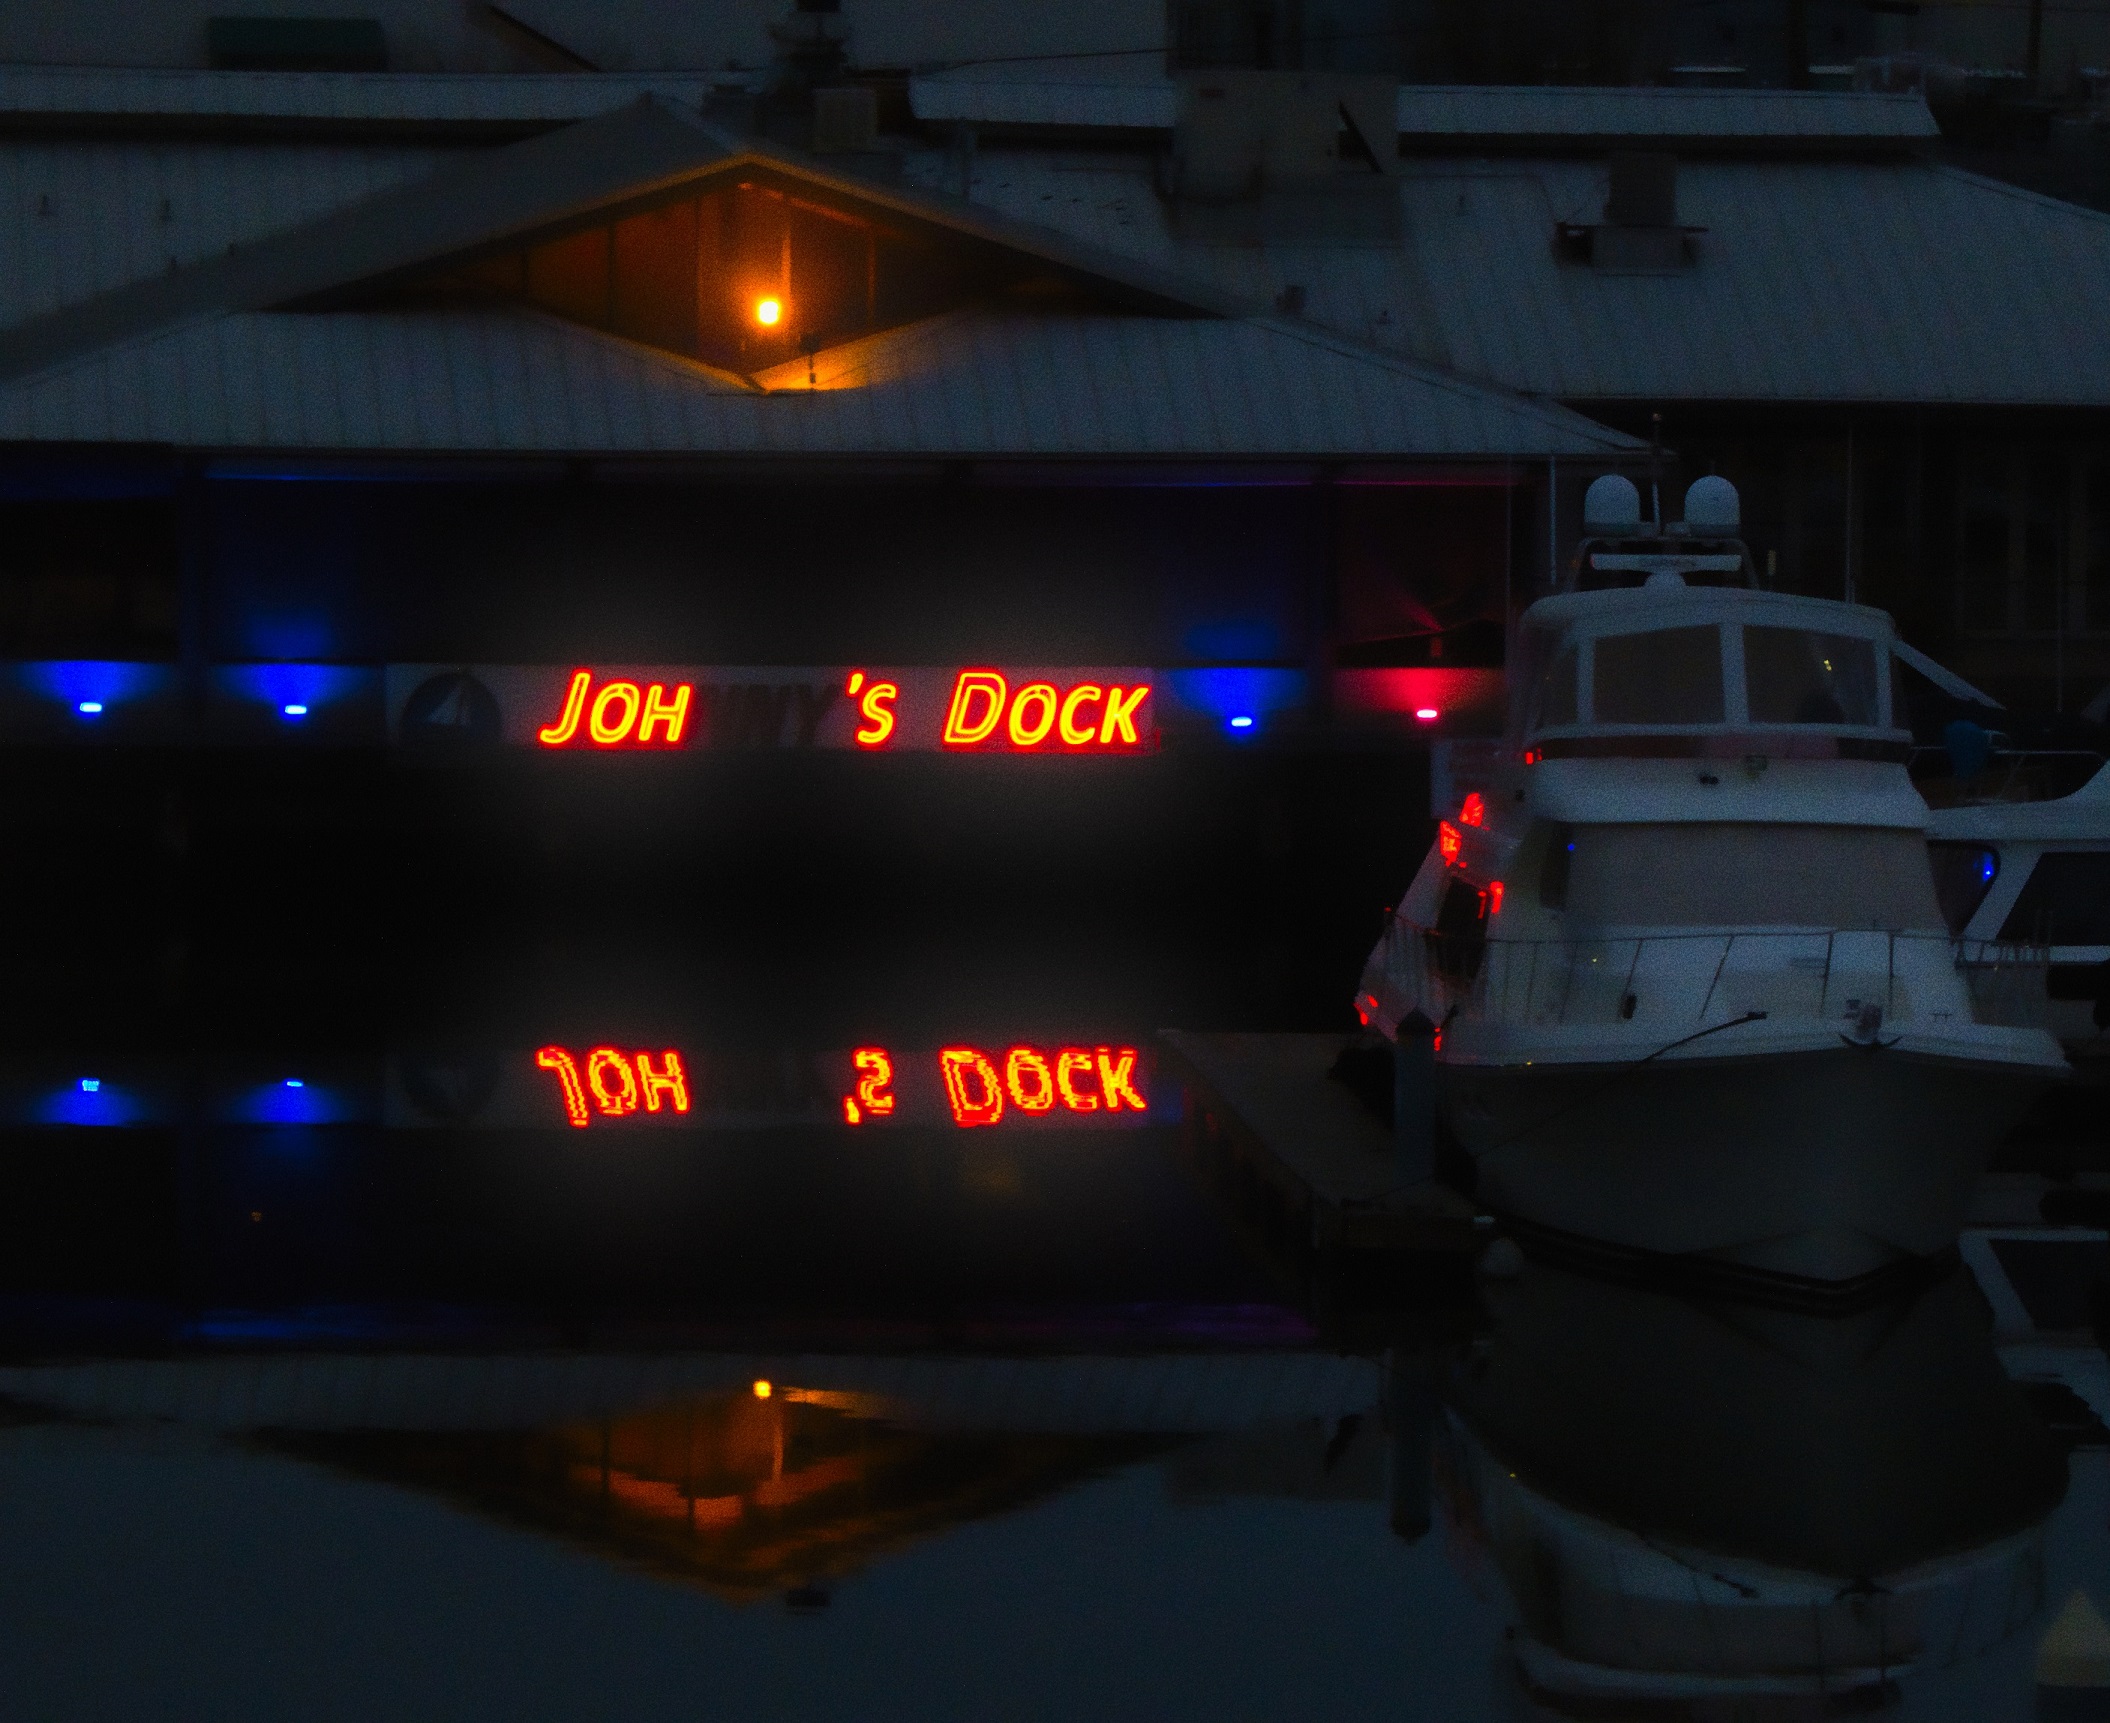 Pictured: A boat dock in the port of Tacoma, at night.